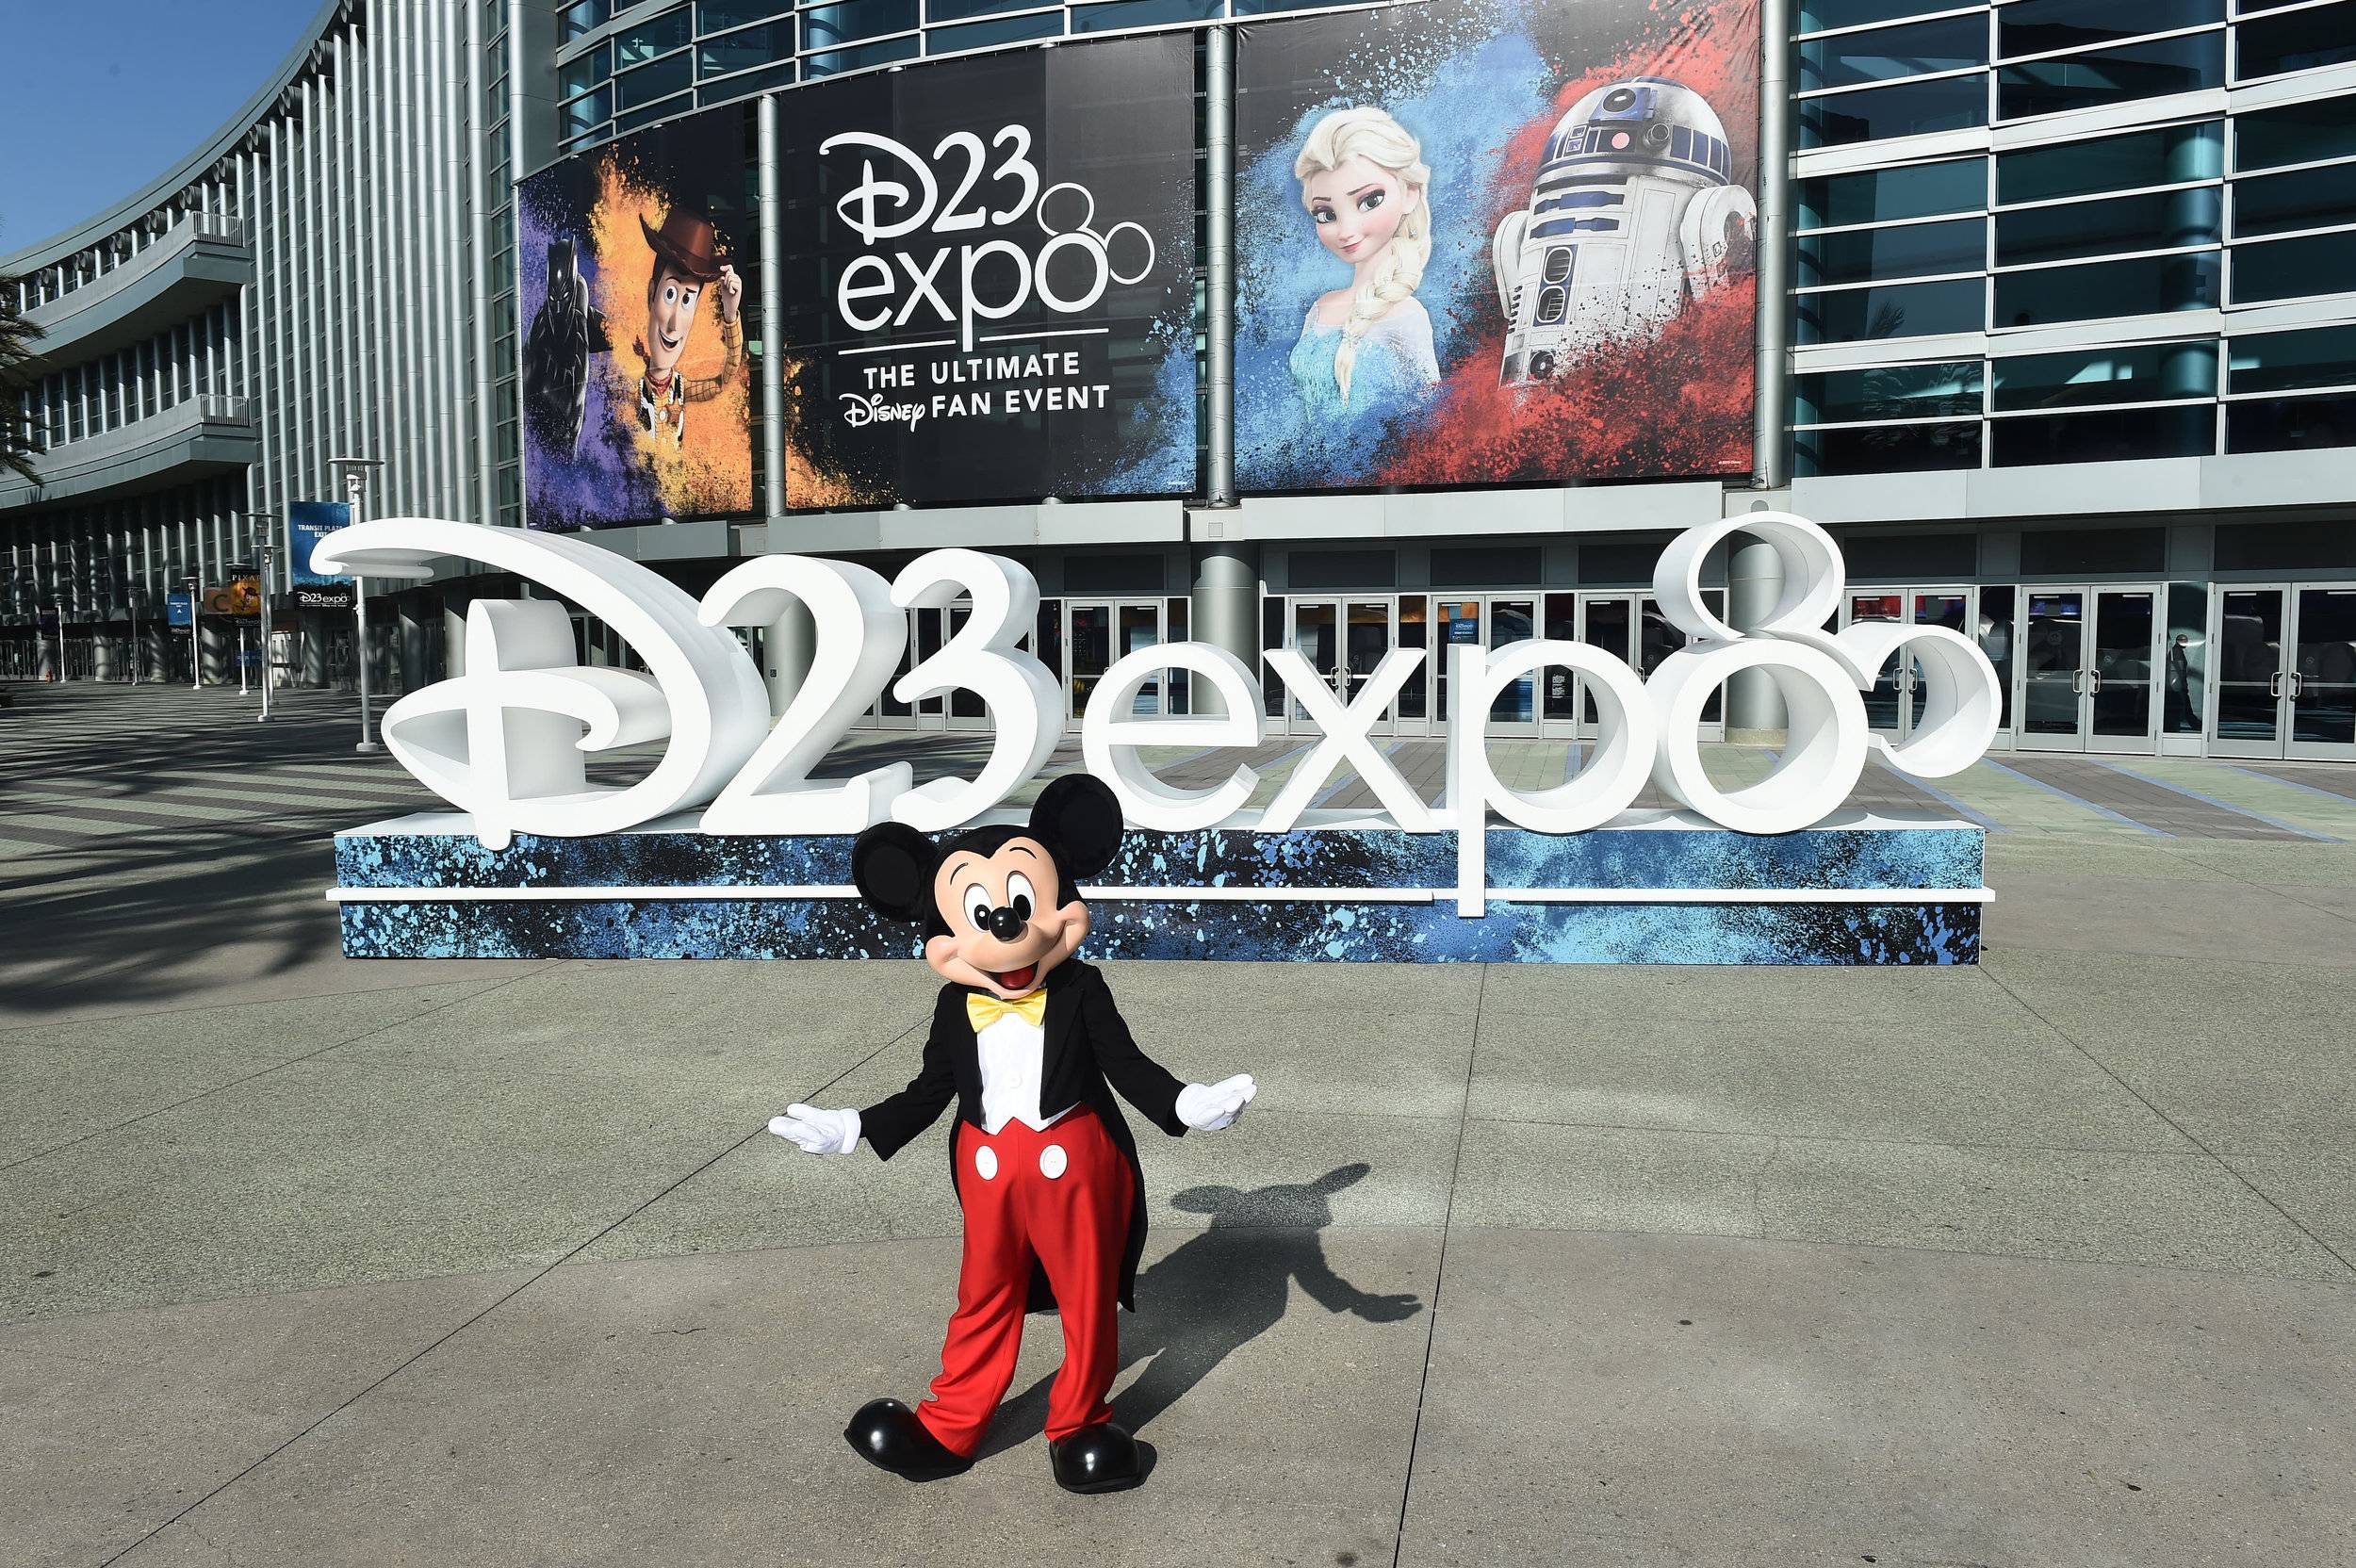 At a Glance - All the Walt Disney World announcements from D23 Expo 2019